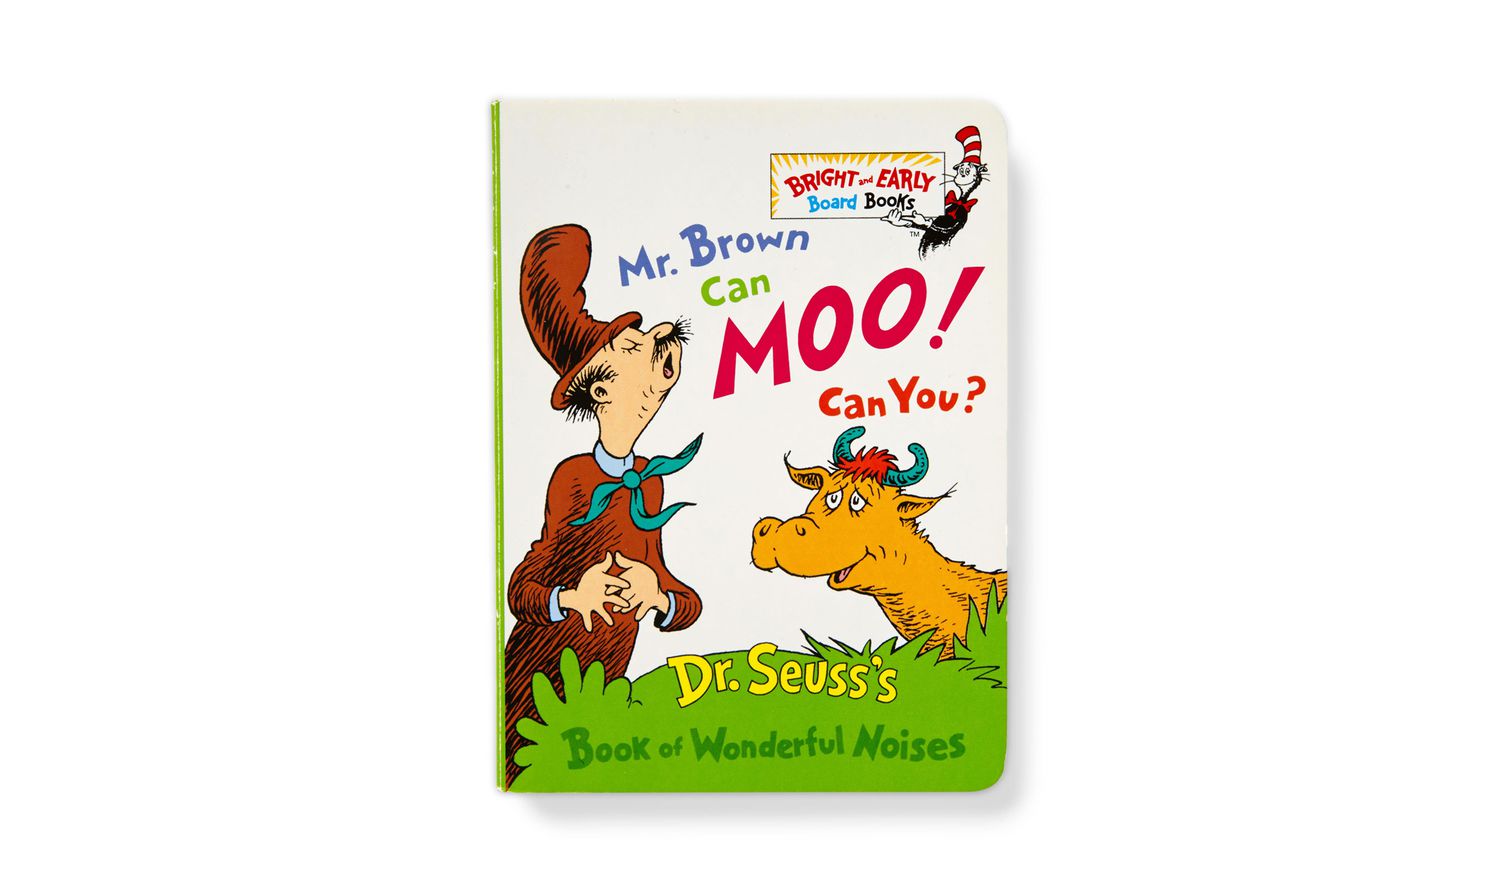 Mr. Brown Can Moo! Can You? book cover